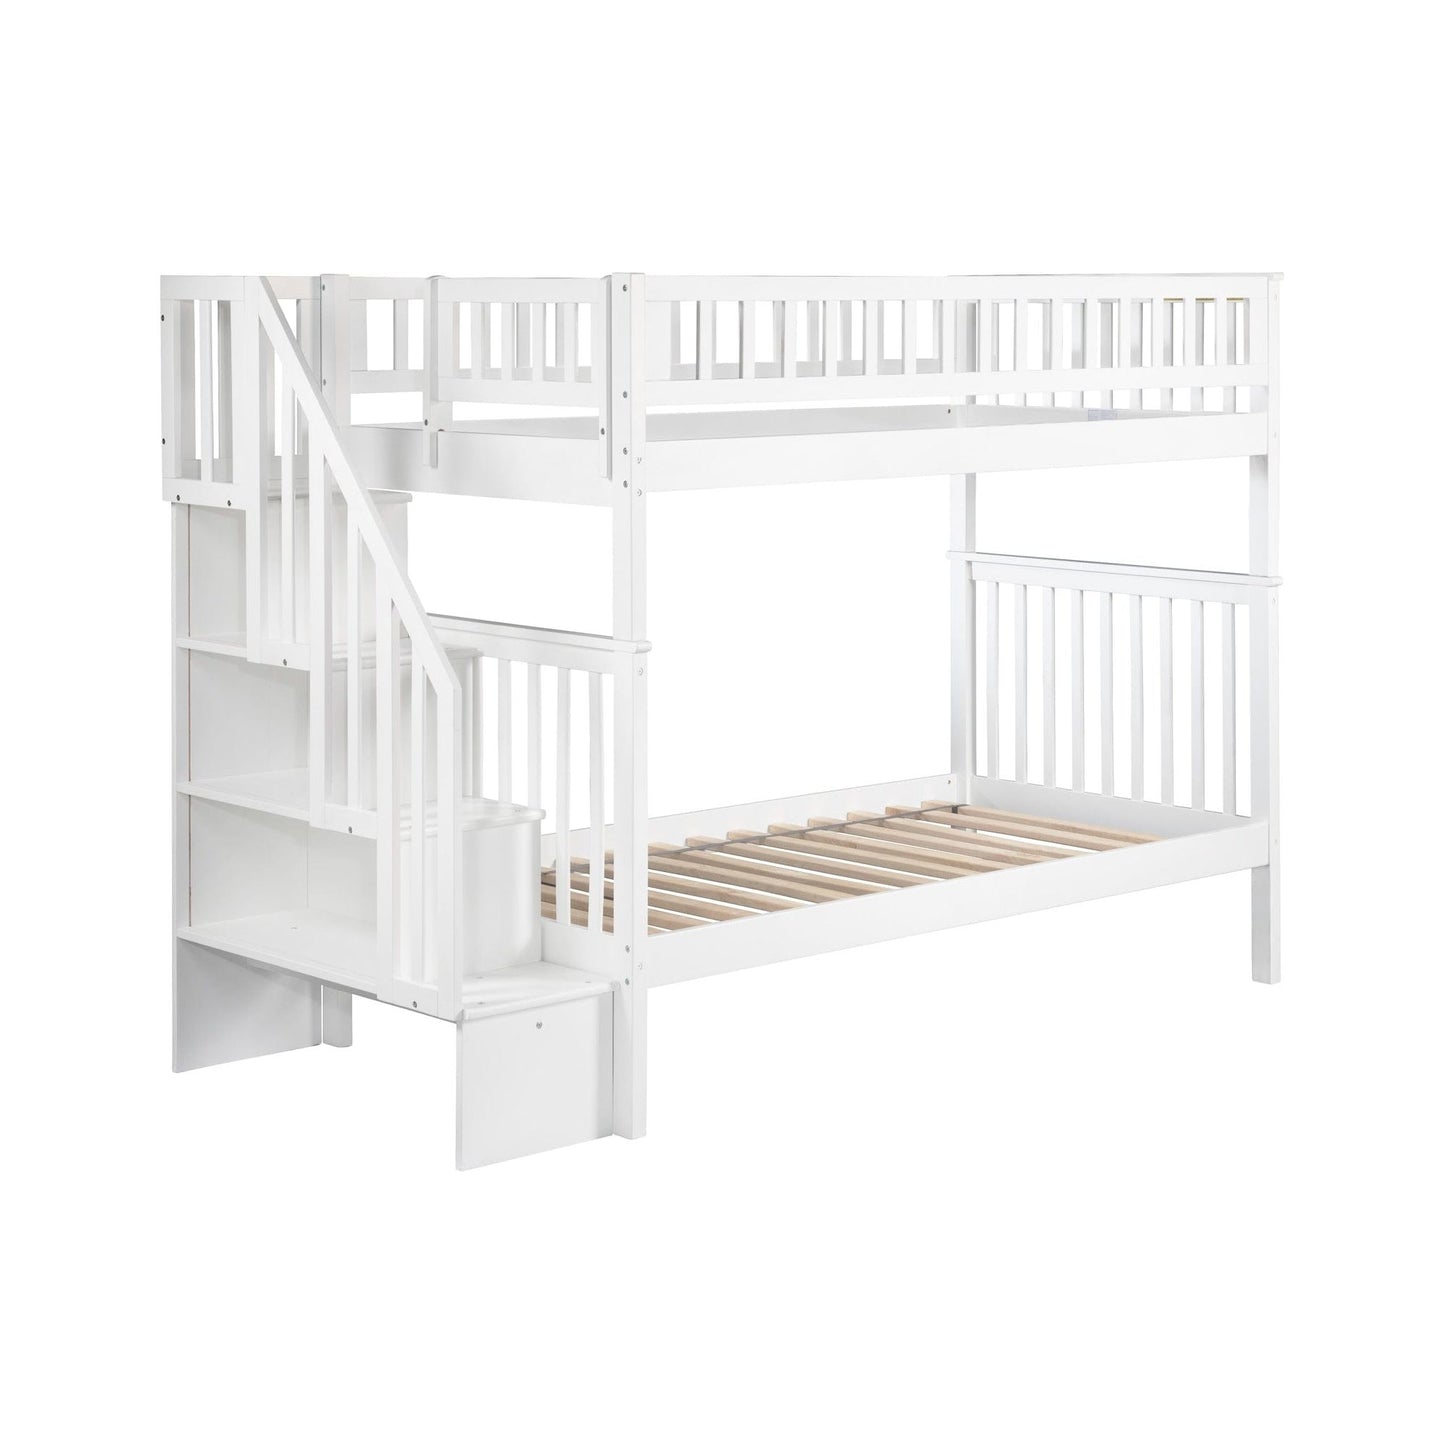 AFI Furnishings Woodland Staircase Bunk Twin over Twin with Turbo Charger